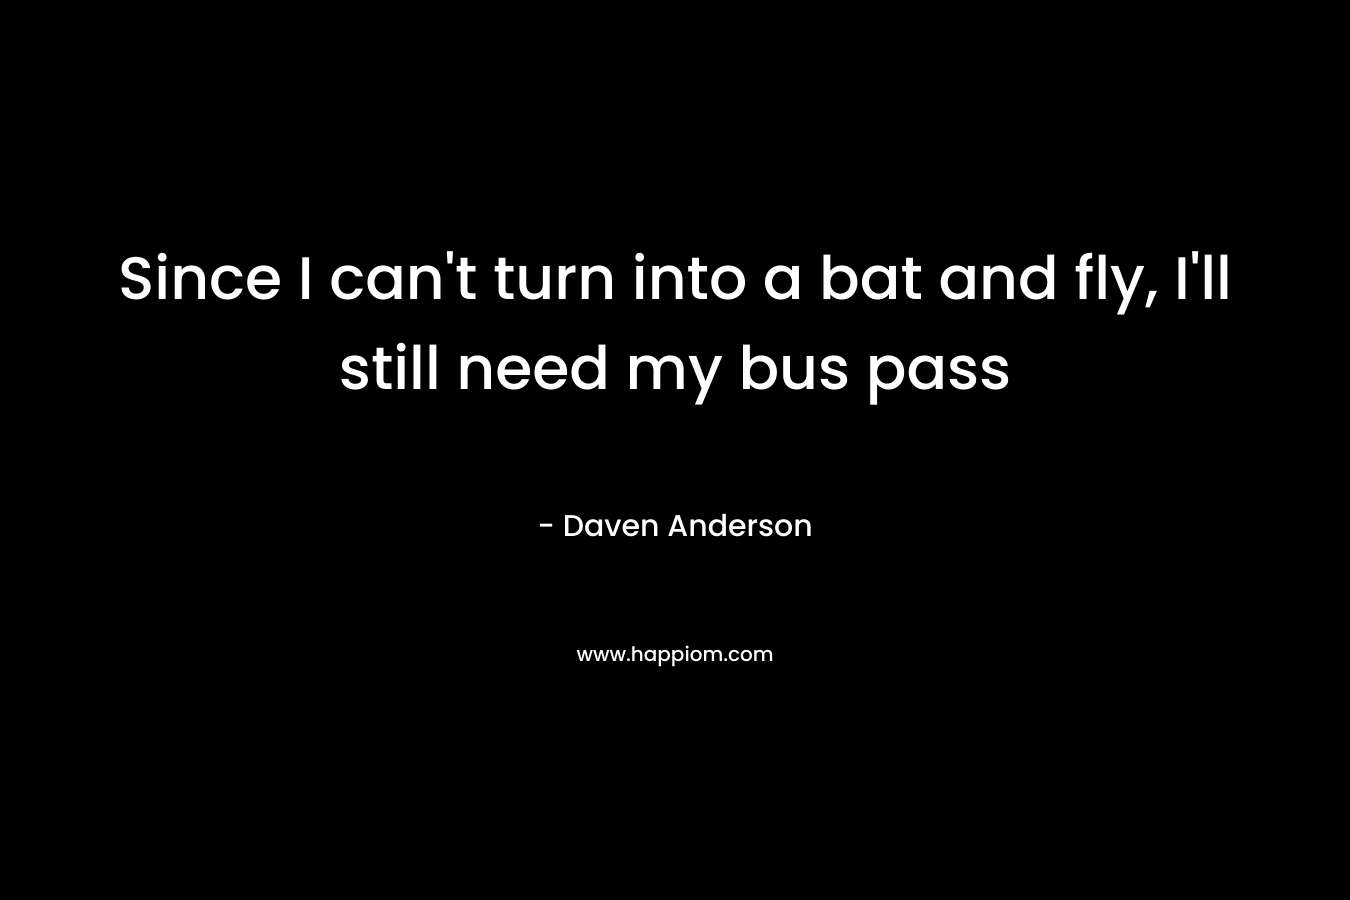 Since I can’t turn into a bat and fly, I’ll still need my bus pass – Daven Anderson